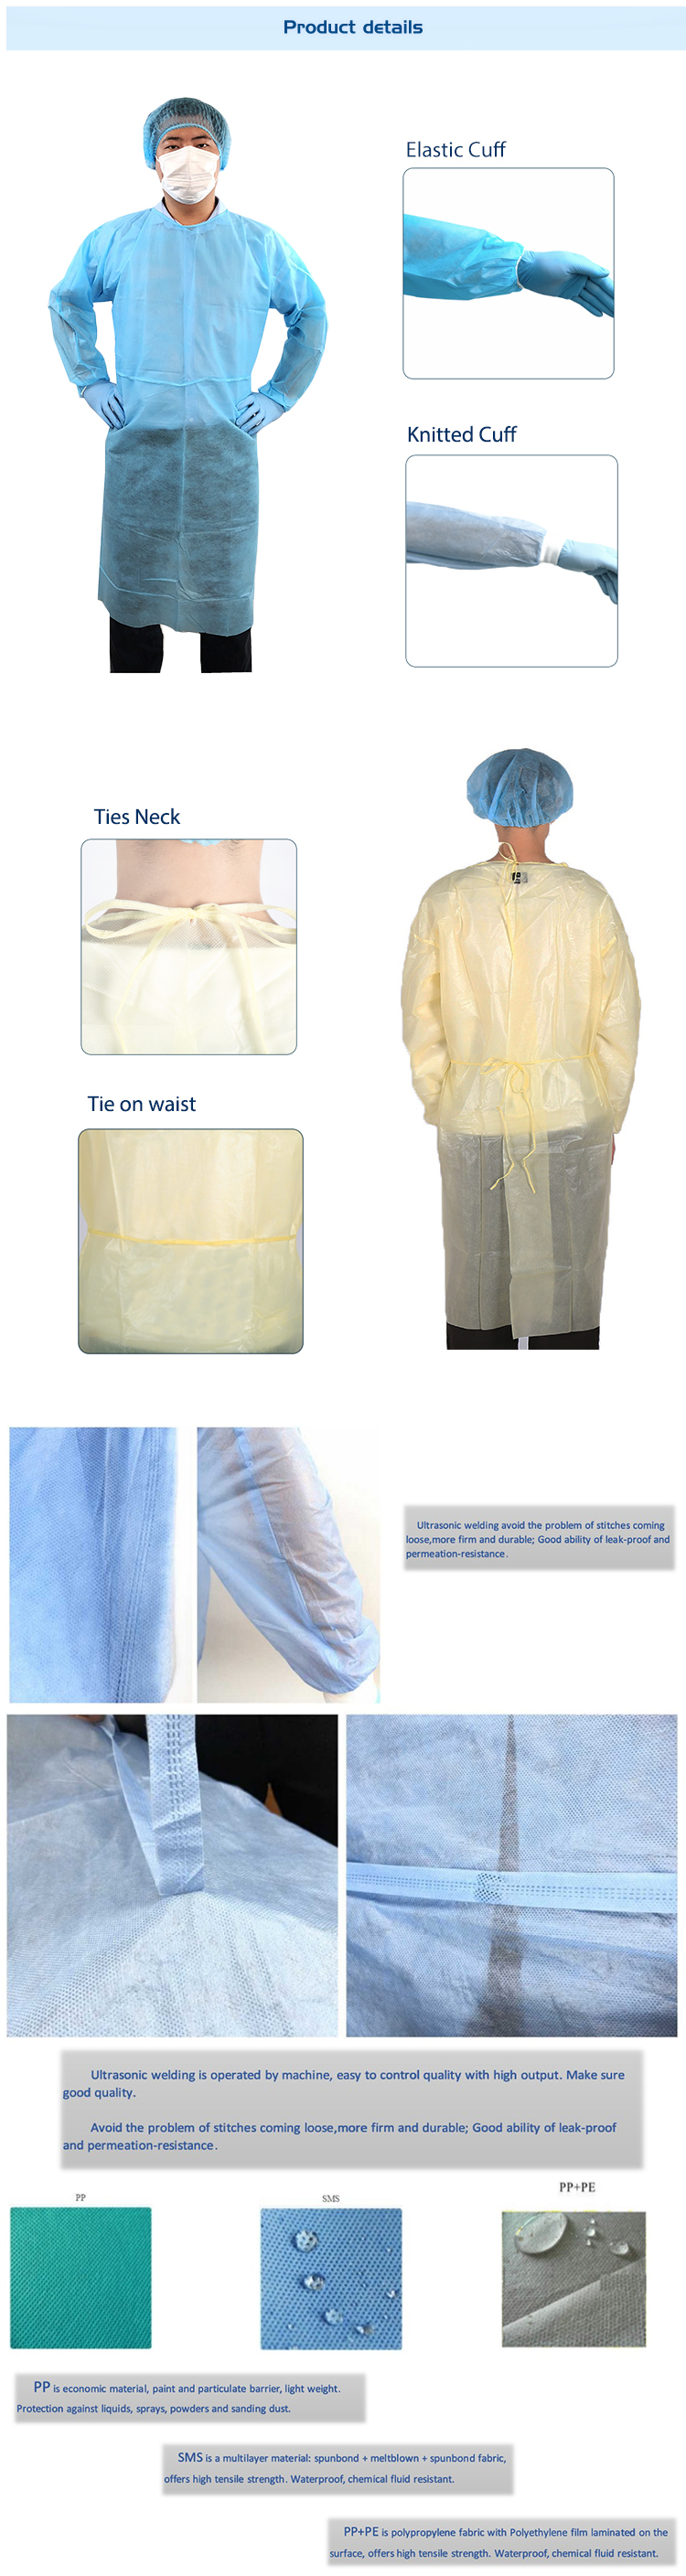 PP laminated PE isolation gown